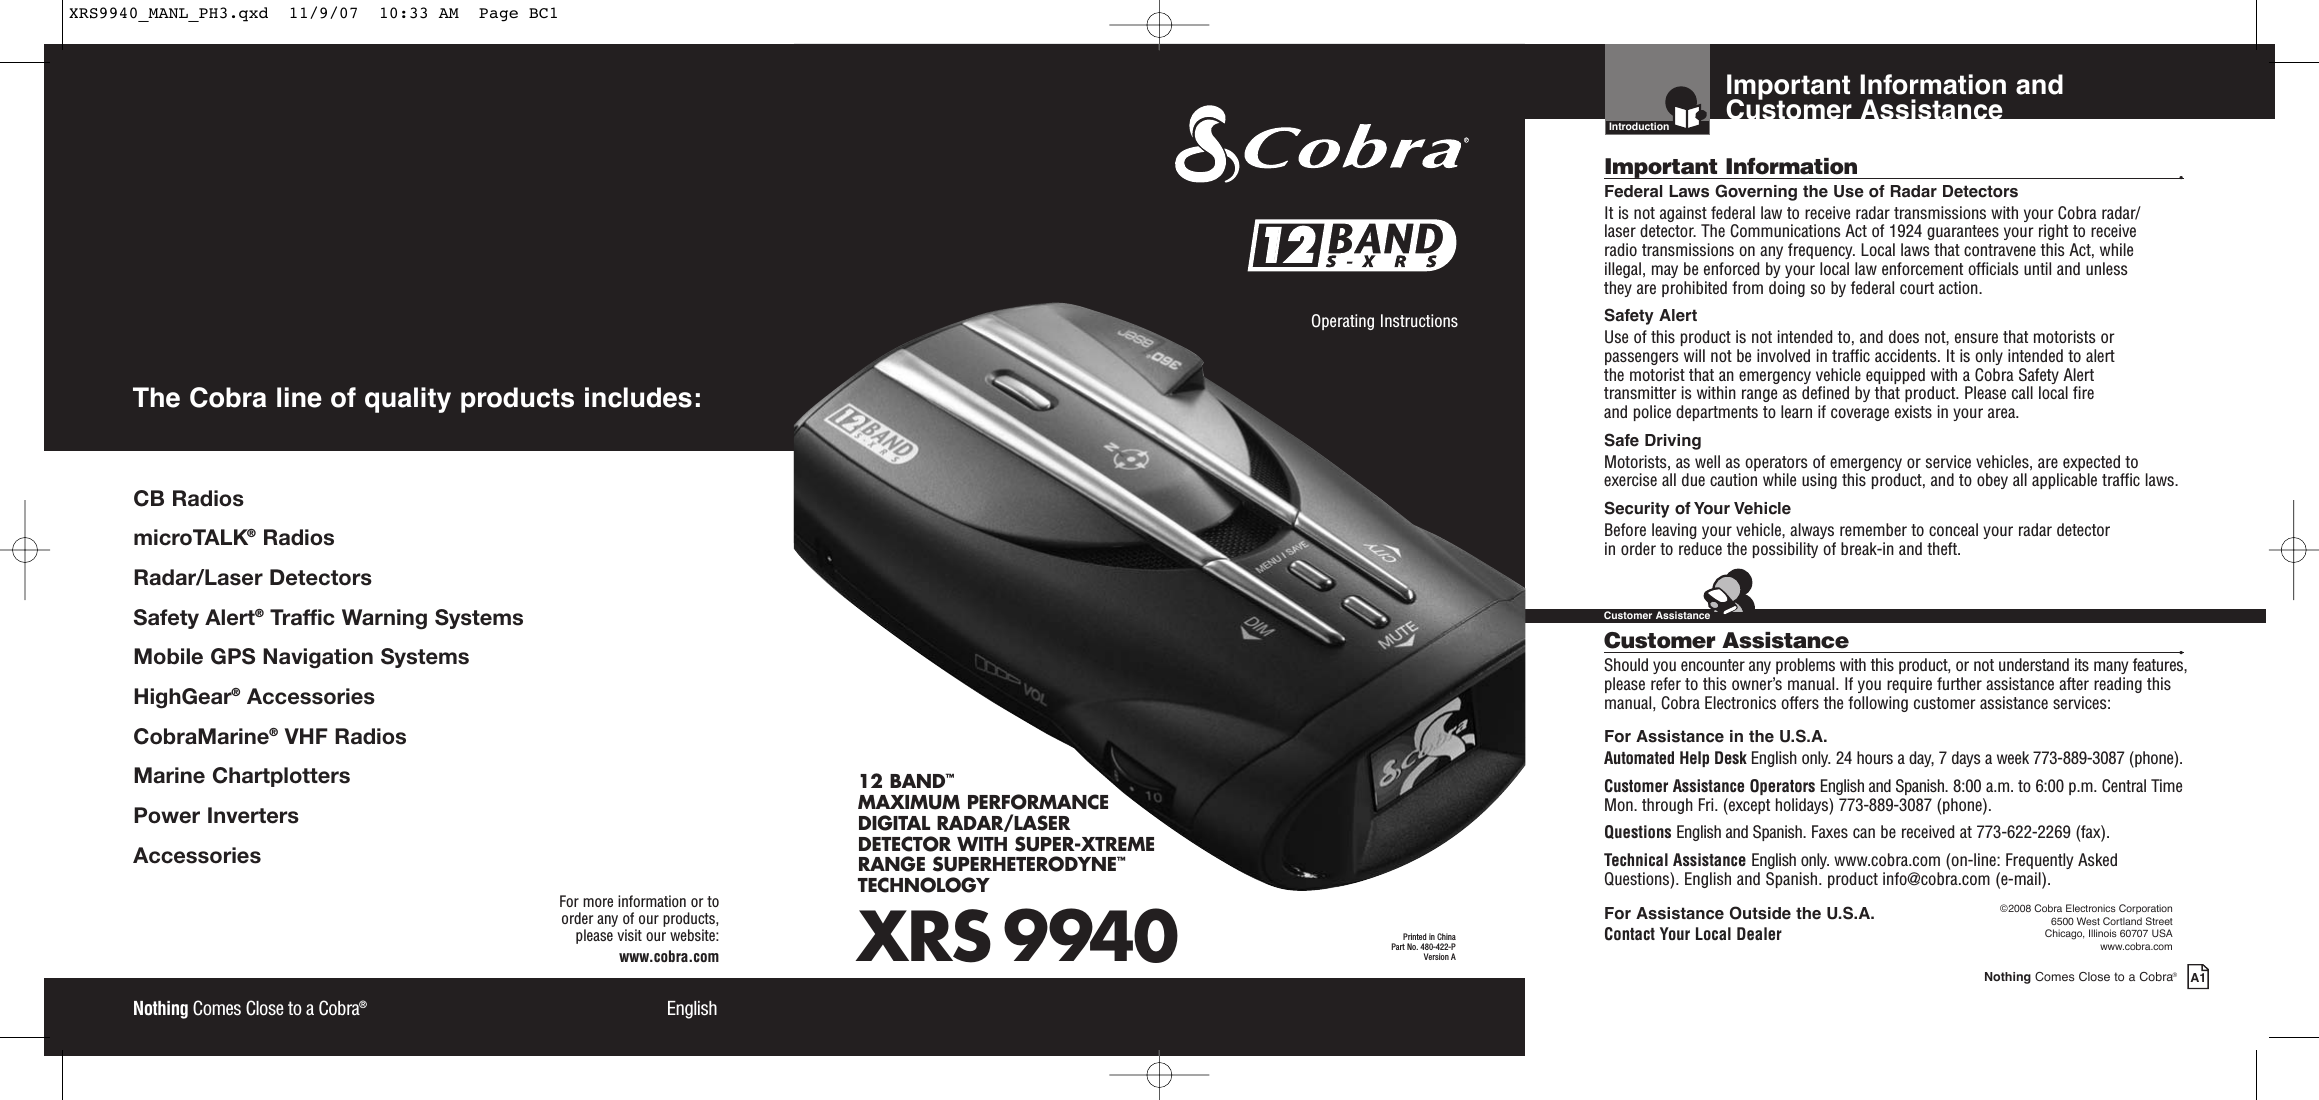 XRS 994012 BAND™MAXIMUM PERFORMANCE DIGITAL RADAR/LASERDETECTOR WITH SUPER-XTREME RANGE SUPERHETERODYNE™TECHNOLOGYNothing Comes Close to a Cobra®EnglishOperating Instructions Printed in China Part No. 480-422-PVersion A12 12 Nothing Comes Close to a Cobra®EnglishFor more information or to order any of our products, please visit our website:www.cobra.comCB RadiosmicroTALK®RadiosRadar/Laser Detectors Safety Alert®Traffic Warning SystemsMobile GPS Navigation SystemsHighGear®Accessories  CobraMarine®VHF Radios  Marine ChartplottersPower InvertersAccessories The Cobra line of quality products includes:Important Information and Customer AssistanceIntroductionNothing Comes Close to a Cobra®A1Important Information •Federal Laws Governing the Use of Radar Detectors It is not against federal law to receive radar transmissions with your Cobra radar/laser detector. The Communications Act of 1924 guarantees your right to receive radio transmissions on any frequency. Local laws that contravene this Act, while illegal, may be enforced by your local law enforcement officials until and unless they are prohibited from doing so by federal court action.Safety AlertUse of this product is not intended to, and does not, ensure that motorists orpassengers will not be involved in traffic accidents. It is only intended to alert the motorist that an emergency vehicle equipped with a Cobra Safety Alert transmitter is within range as defined by that product. Please call local fire and police departments to learn if coverage exists in your area.Safe Driving Motorists, as well as operators of emergency or service vehicles, are expected toexercise all due caution while using this product, and to obey all applicable traffic laws.Security of Your Vehicle Before leaving your vehicle, always remember to conceal your radar detector in order to reduce the possibility of break-in and theft.Customer Assistance •Should you encounter any problems with this product, or not understand its many features,please refer to this owner’s manual. If you require further assistance after reading thismanual, Cobra Electronics offers the following customer assistance services:For Assistance in the U.S.A.Automated Help Desk English only. 24 hours a day, 7 days a week 773-889-3087 (phone).Customer Assistance Operators English and Spanish. 8:00 a.m. to 6:00 p.m. Central TimeMon. through Fri. (except holidays) 773-889-3087 (phone).Questions English and Spanish. Faxes can be received at 773-622-2269 (fax).Technical Assistance English only. www.cobra.com (on-line: Frequently AskedQuestions). English and Spanish. product info@cobra.com (e-mail).For Assistance Outside the U.S.A.Contact Your Local Dealer©2008 Cobra Electronics Corporation6500 West Cortland StreetChicago, Illinois 60707 USAwww.cobra.comCustomer AssistanceXRS9940_MANL_PH3.qxd  11/9/07  10:33 AM  Page BC1